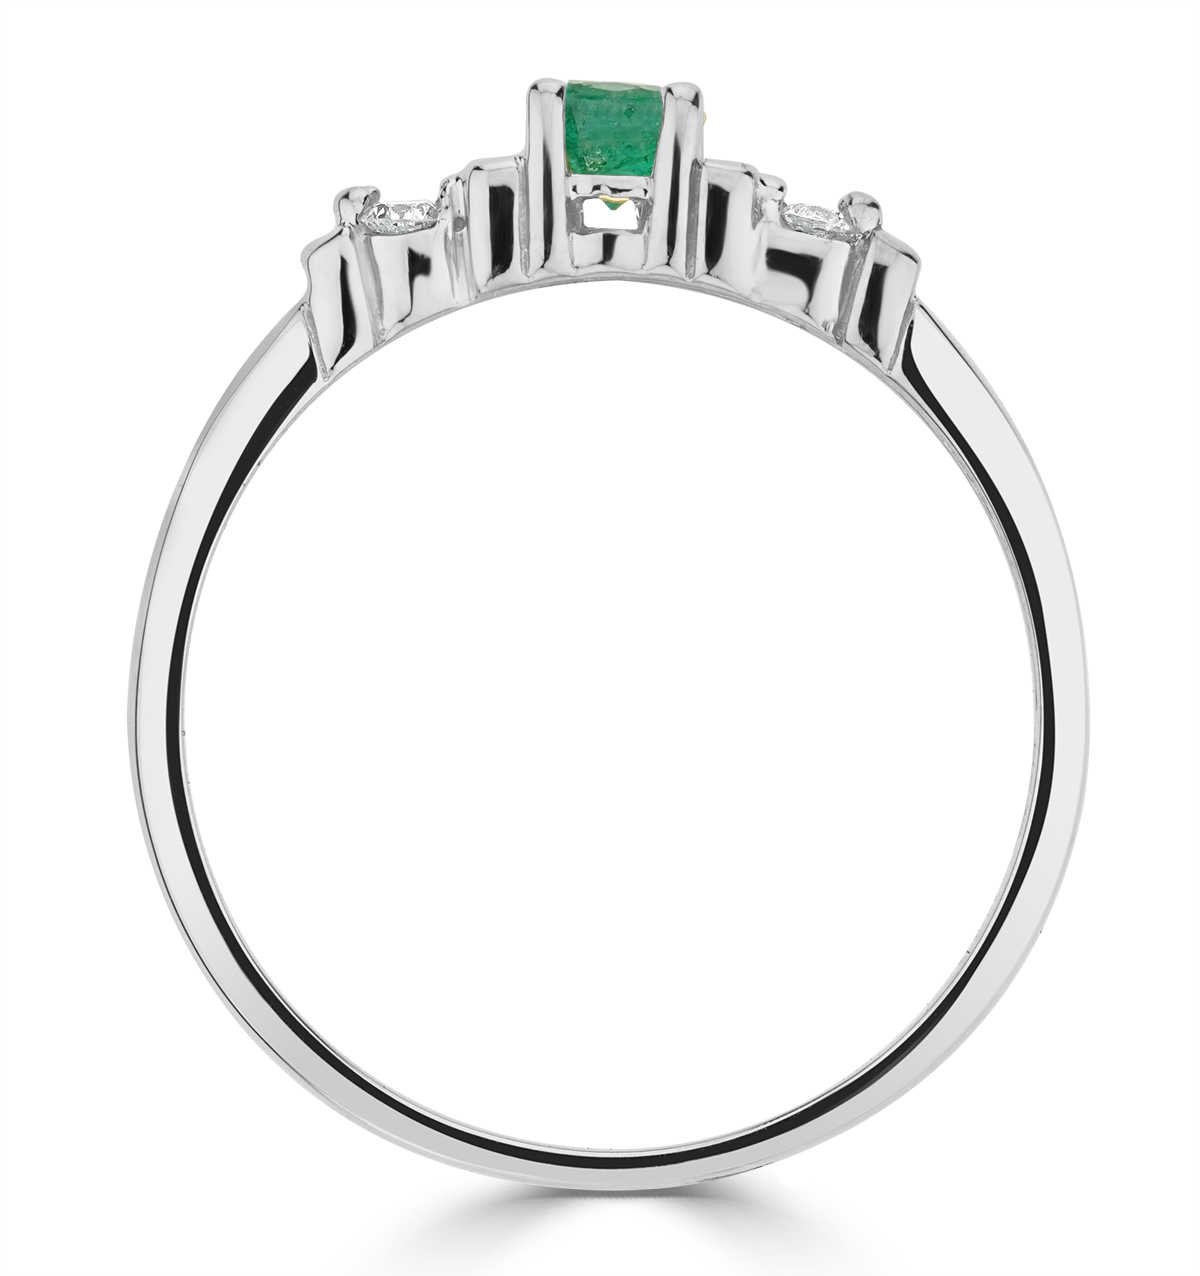 Emerald Rings | Over 150 Styles | TheDiamondStore.co.uk™